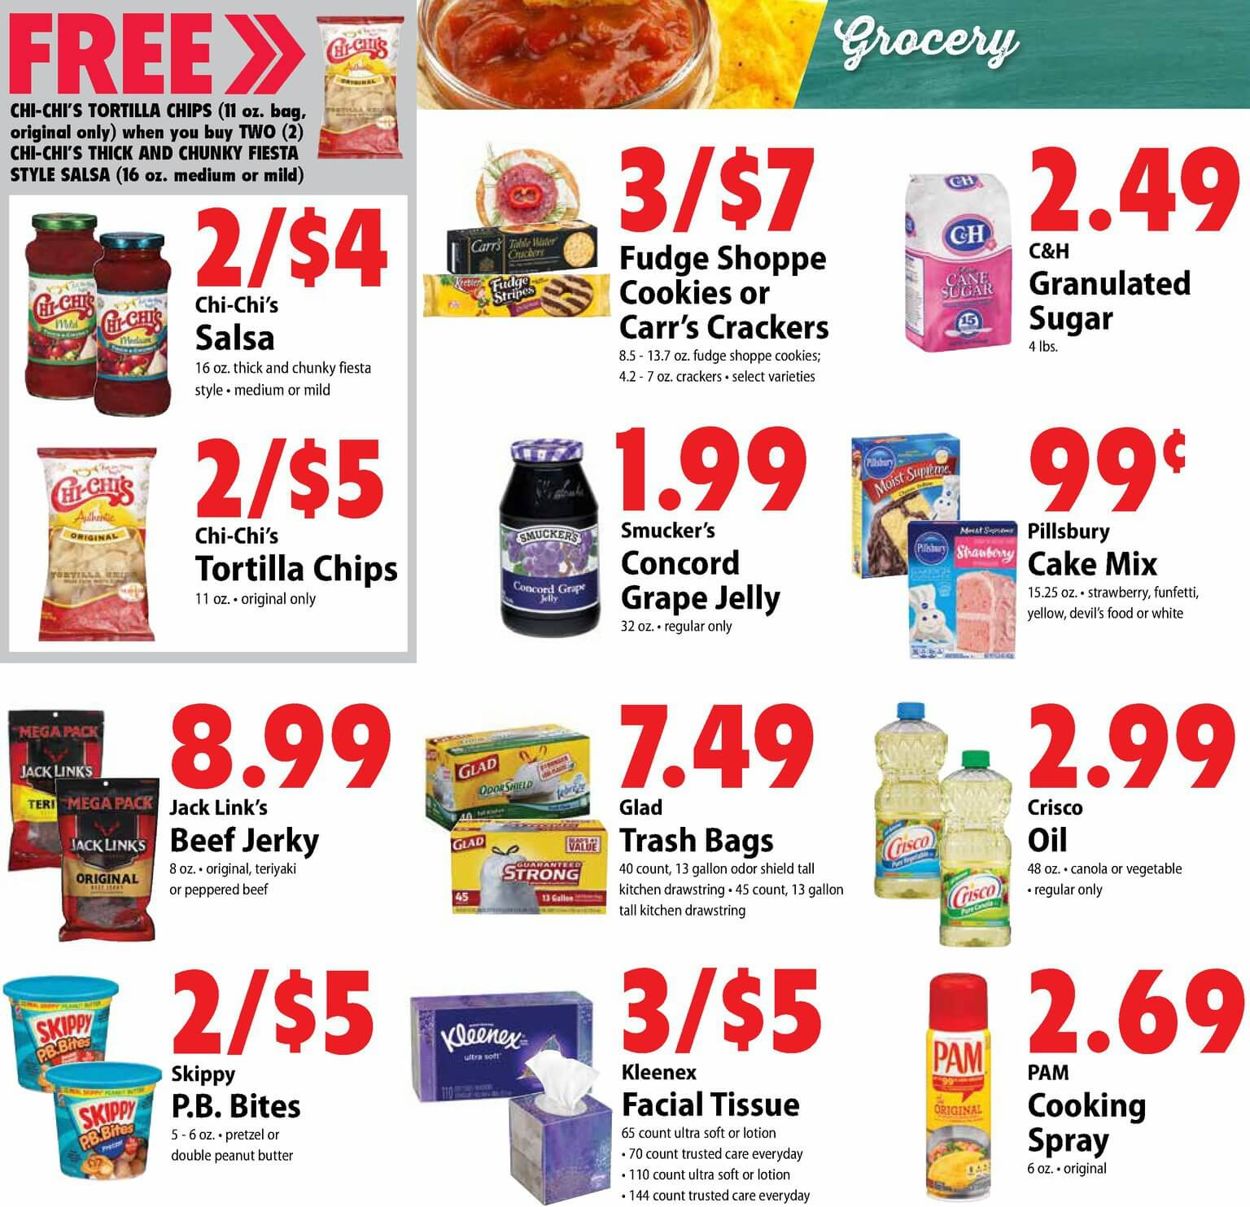 Festival Foods Current weekly ad 08/14 08/20/2019 [11]